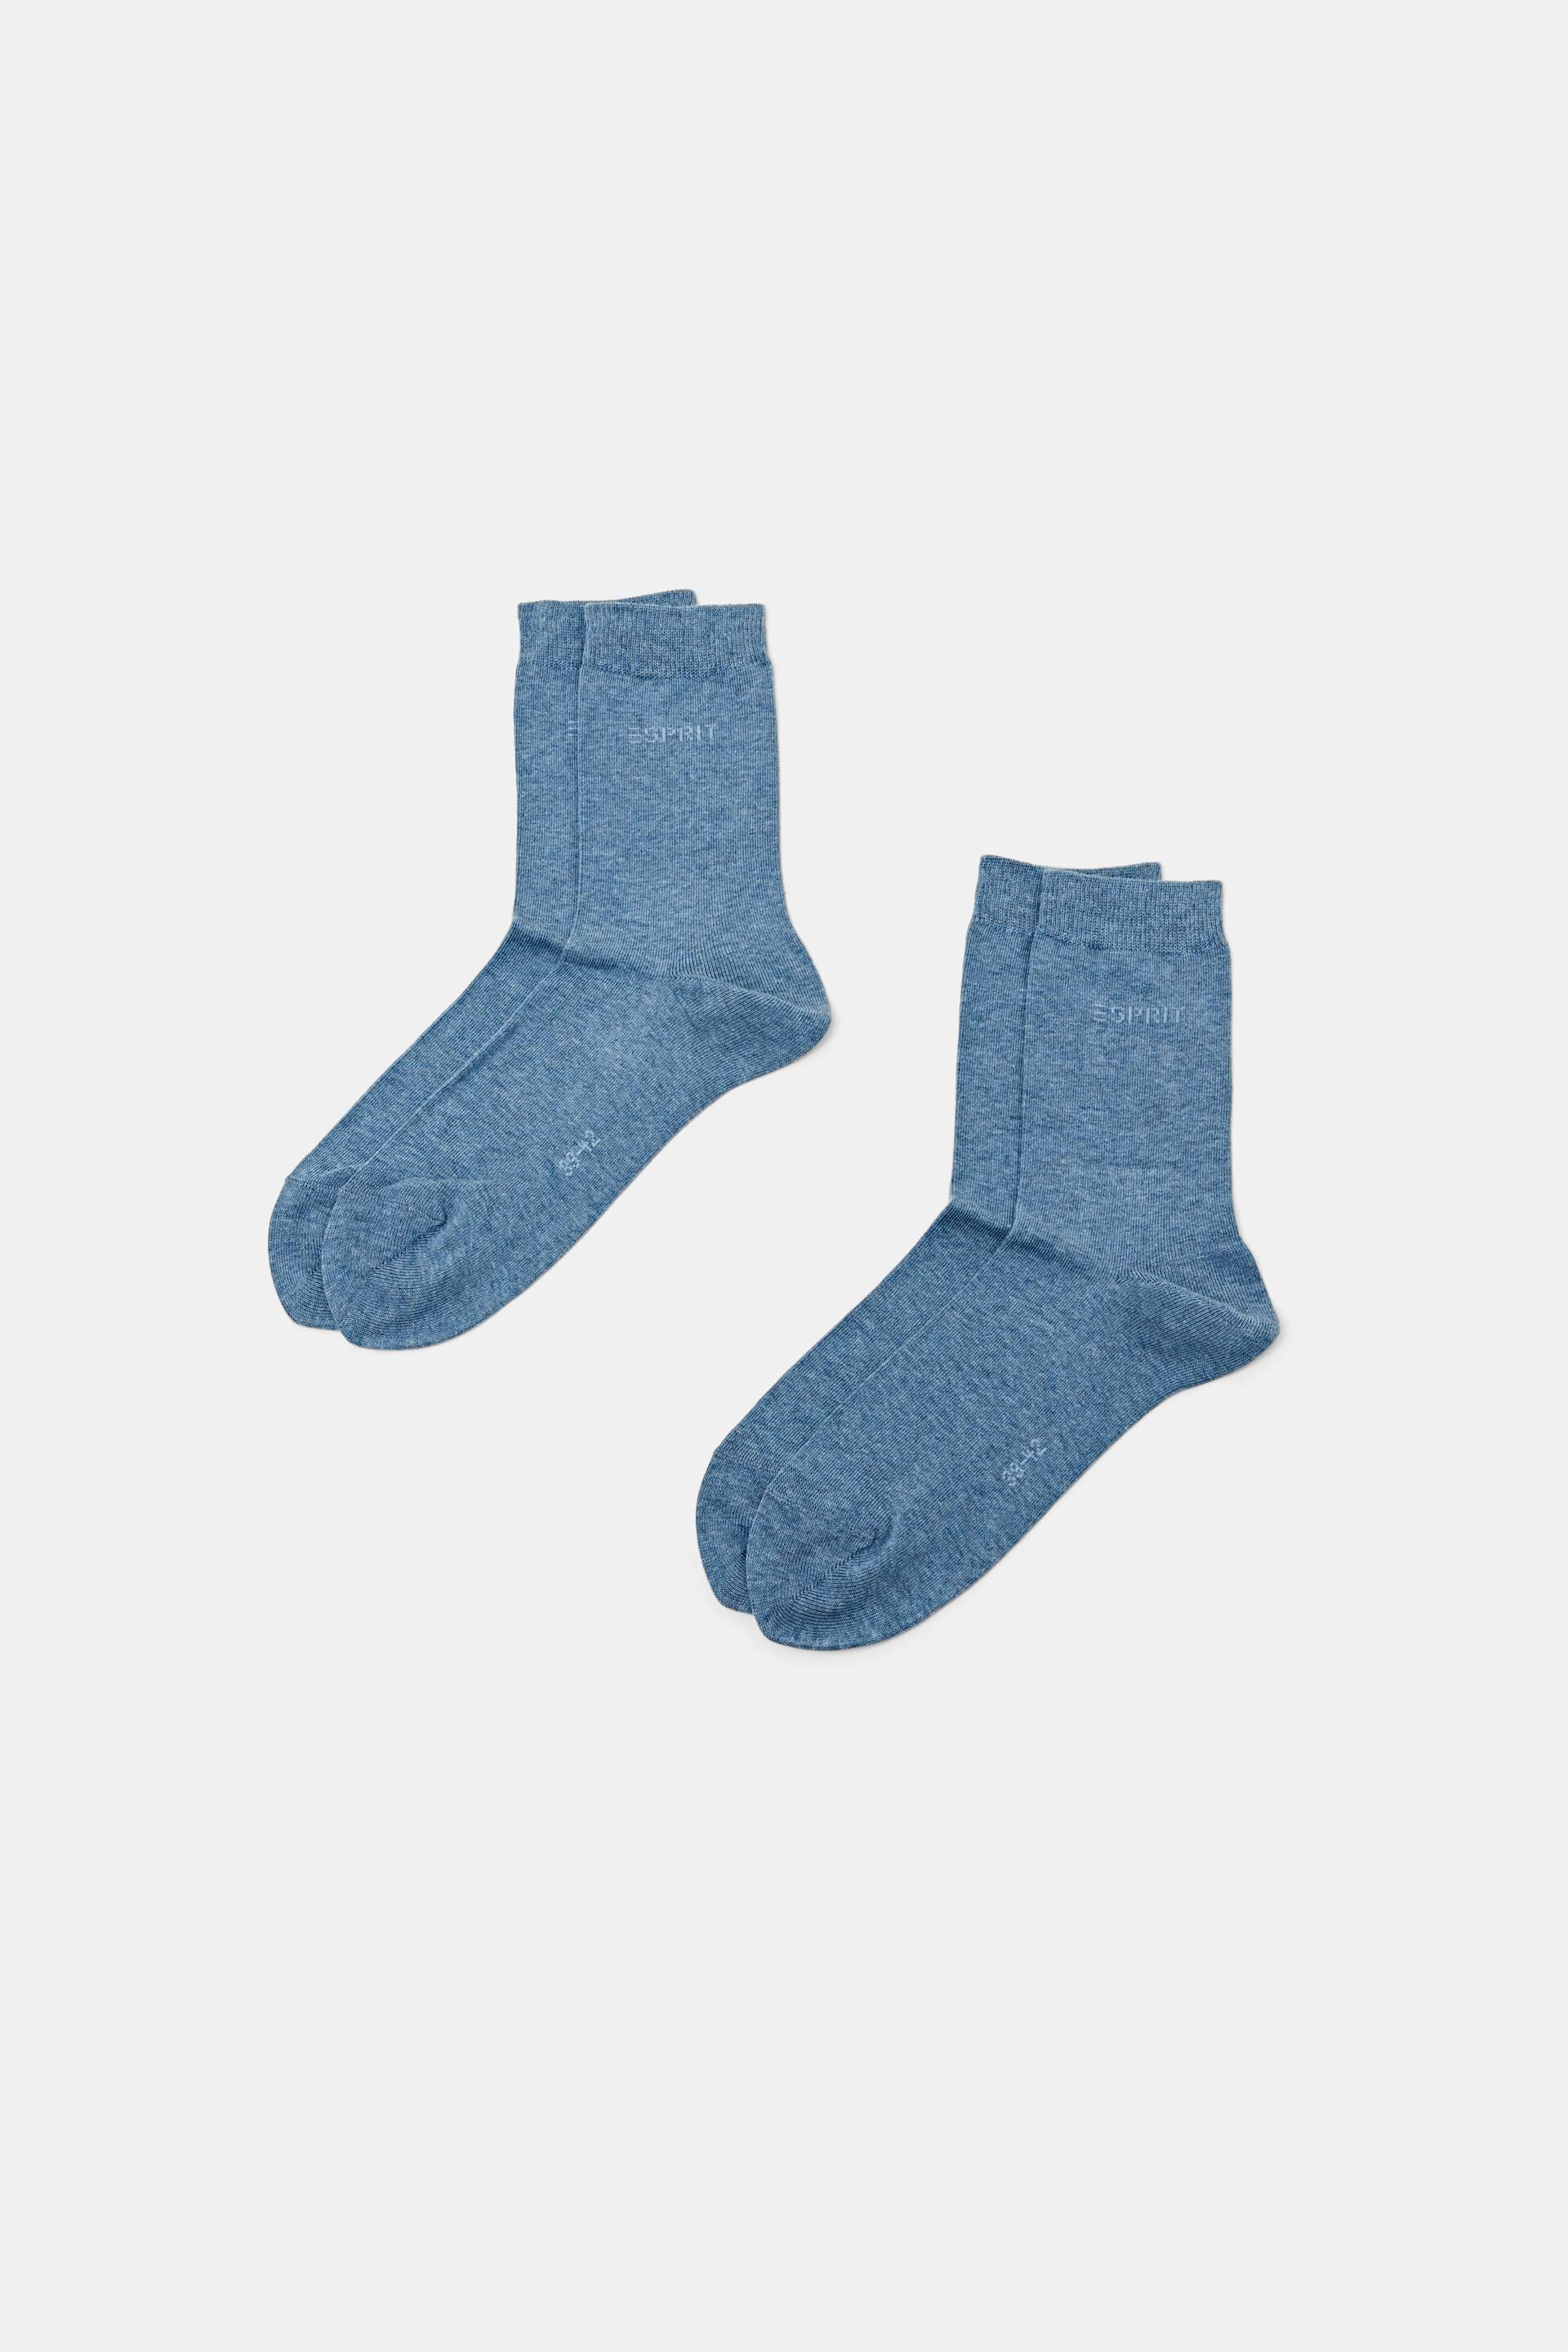 Esprit organic logo, knitted of cotton socks with 2-pack